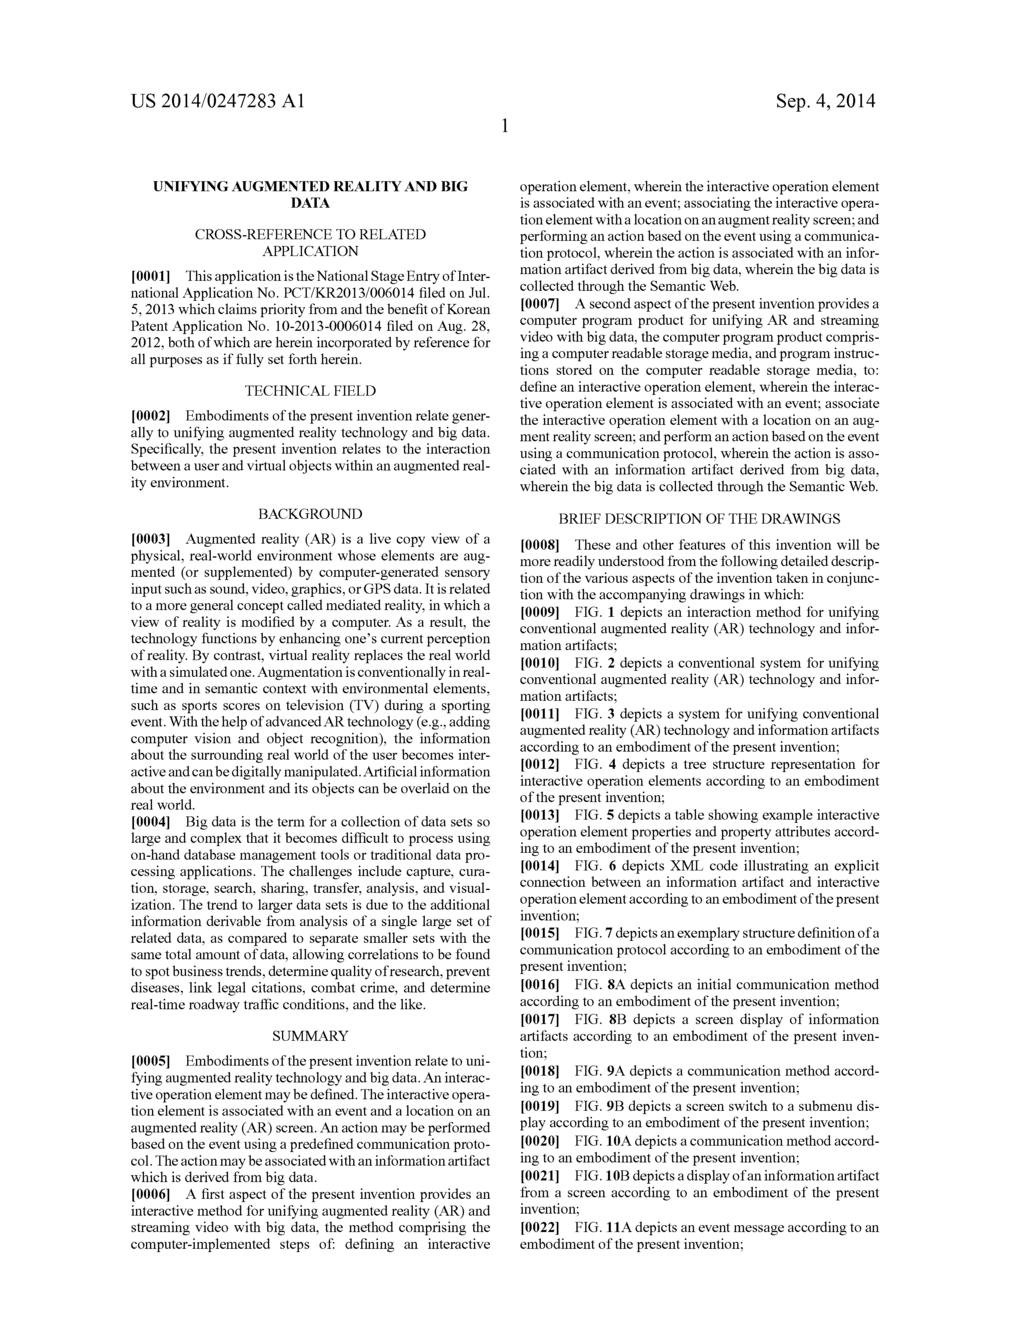 US 2014/0247283 A1 Sep. 4, 2014 UNIFYING AUGMENTED REALITY AND BIG DATA CROSS-REFERENCE TO RELATED APPLICATION [0001] This application is the National Stage Entry of Inter national Application No.